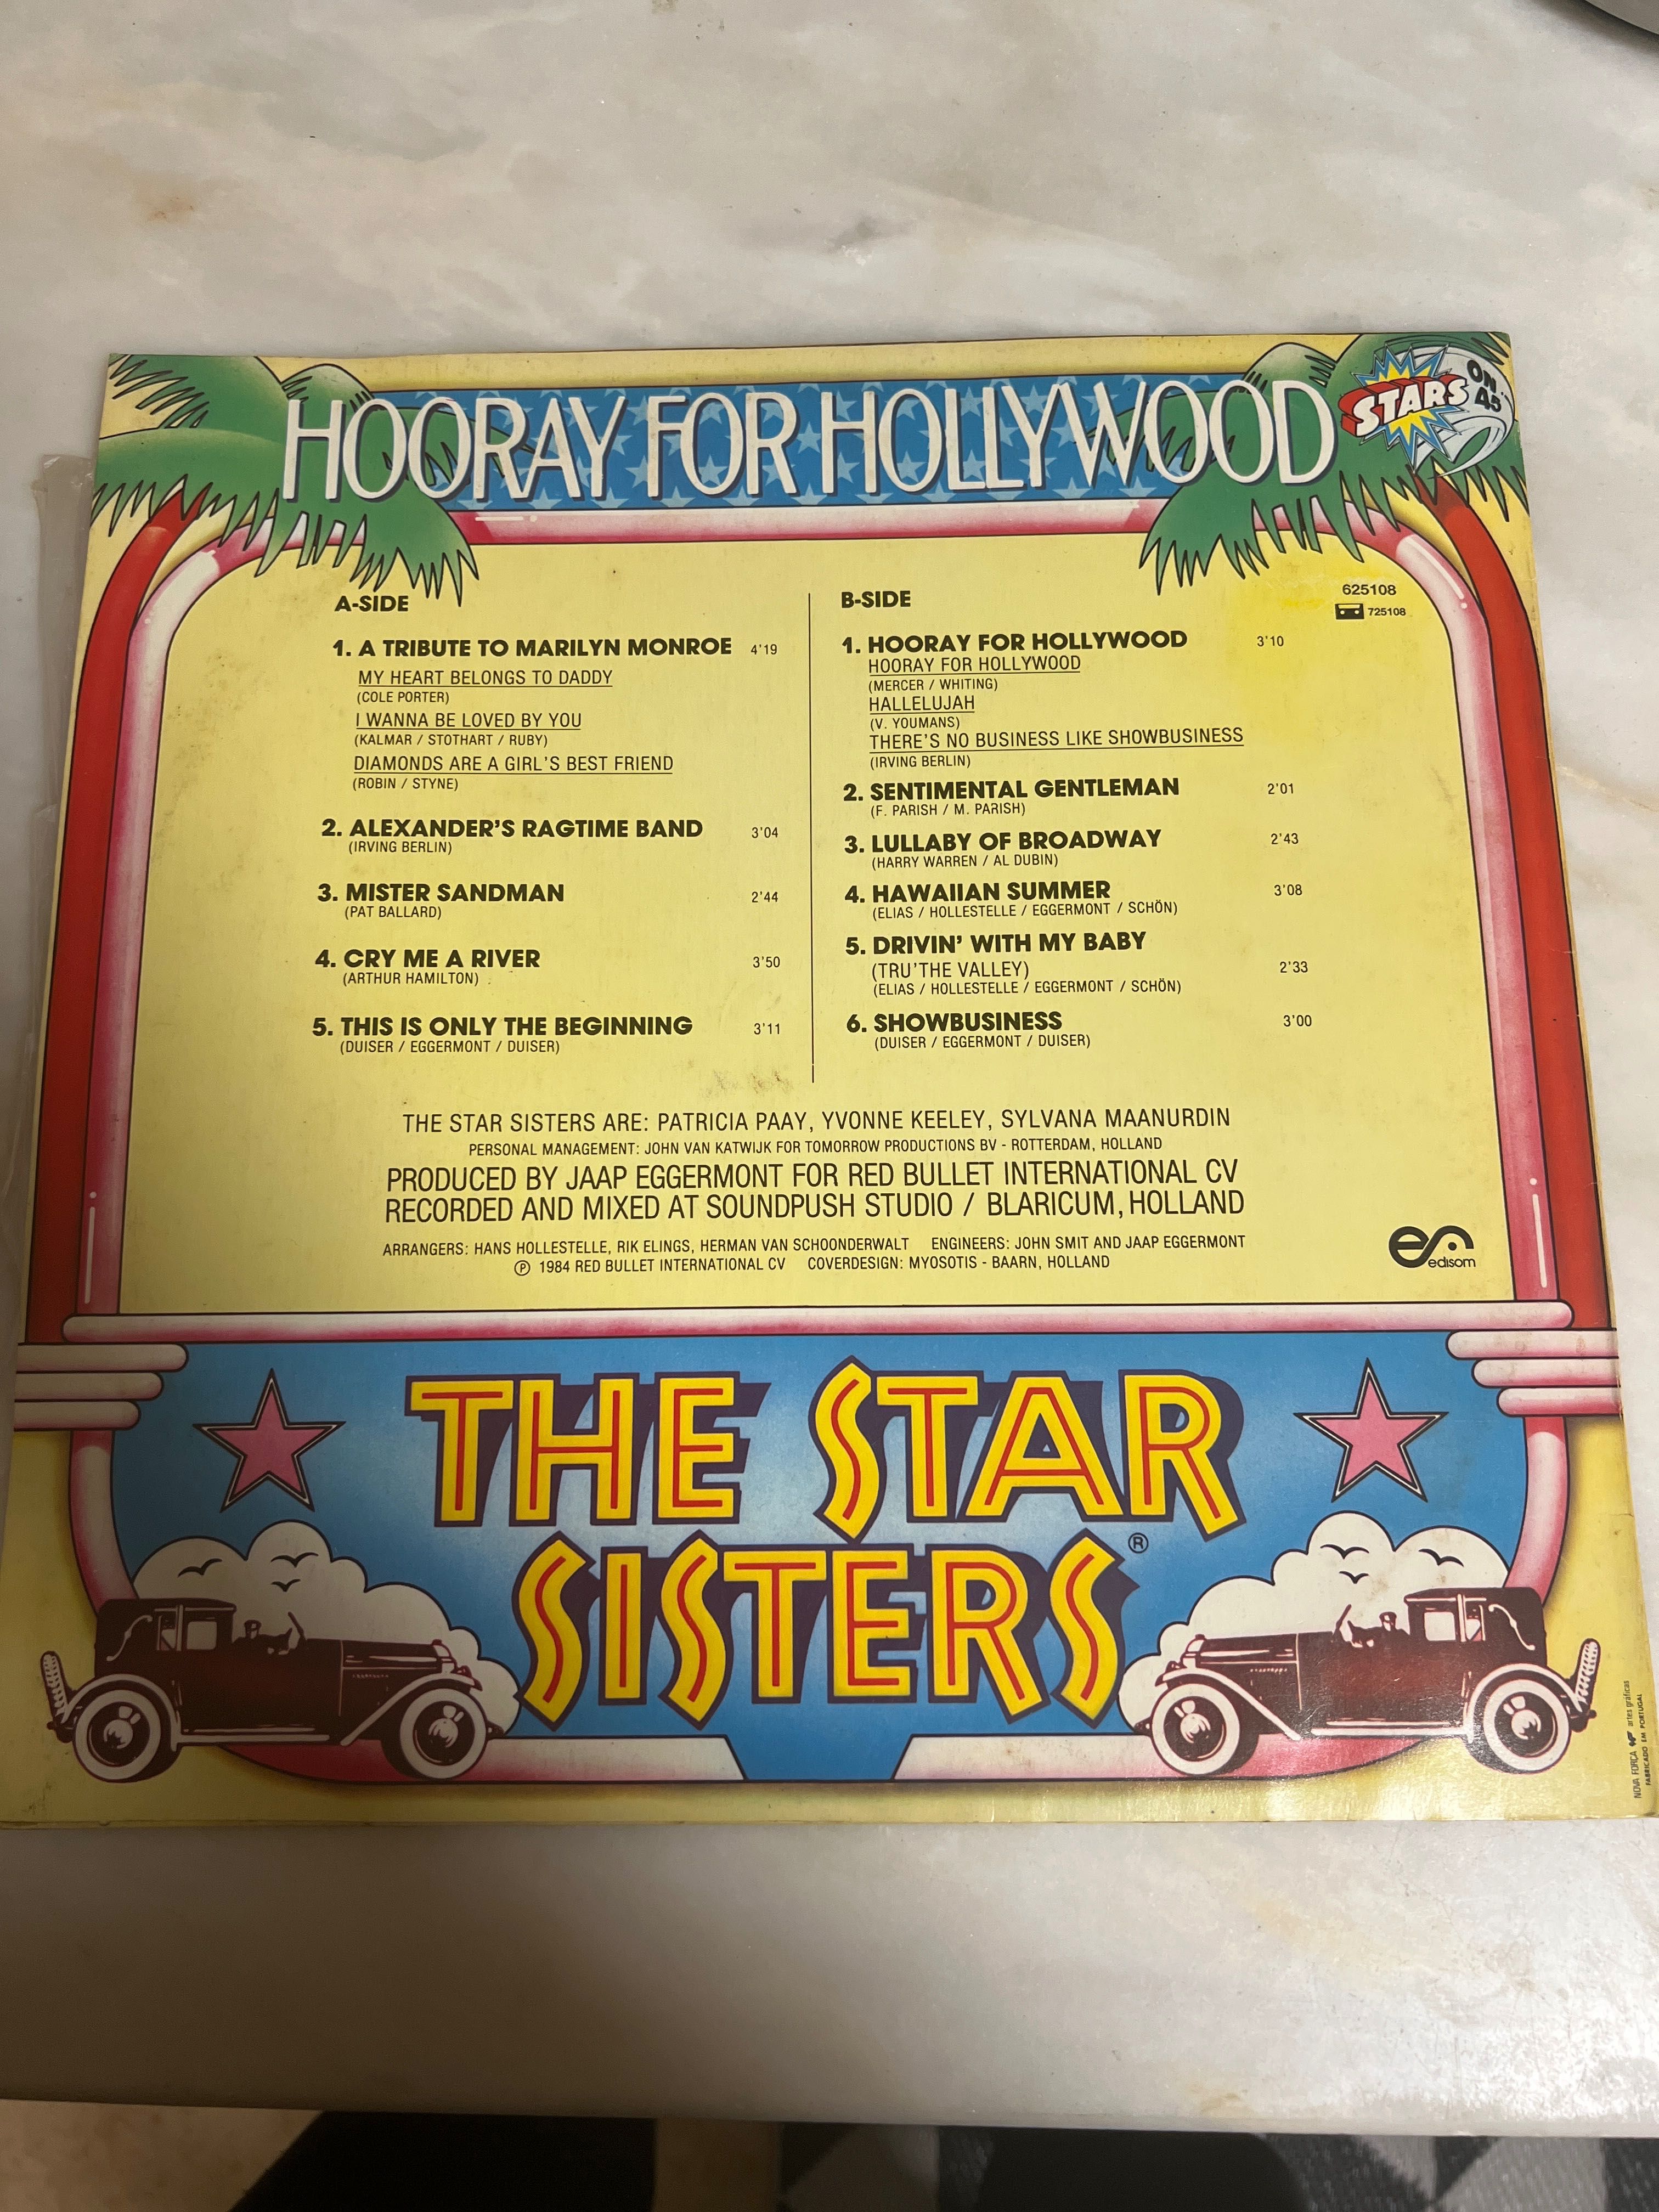 The Star Sisters (Hooray For Hollywood)